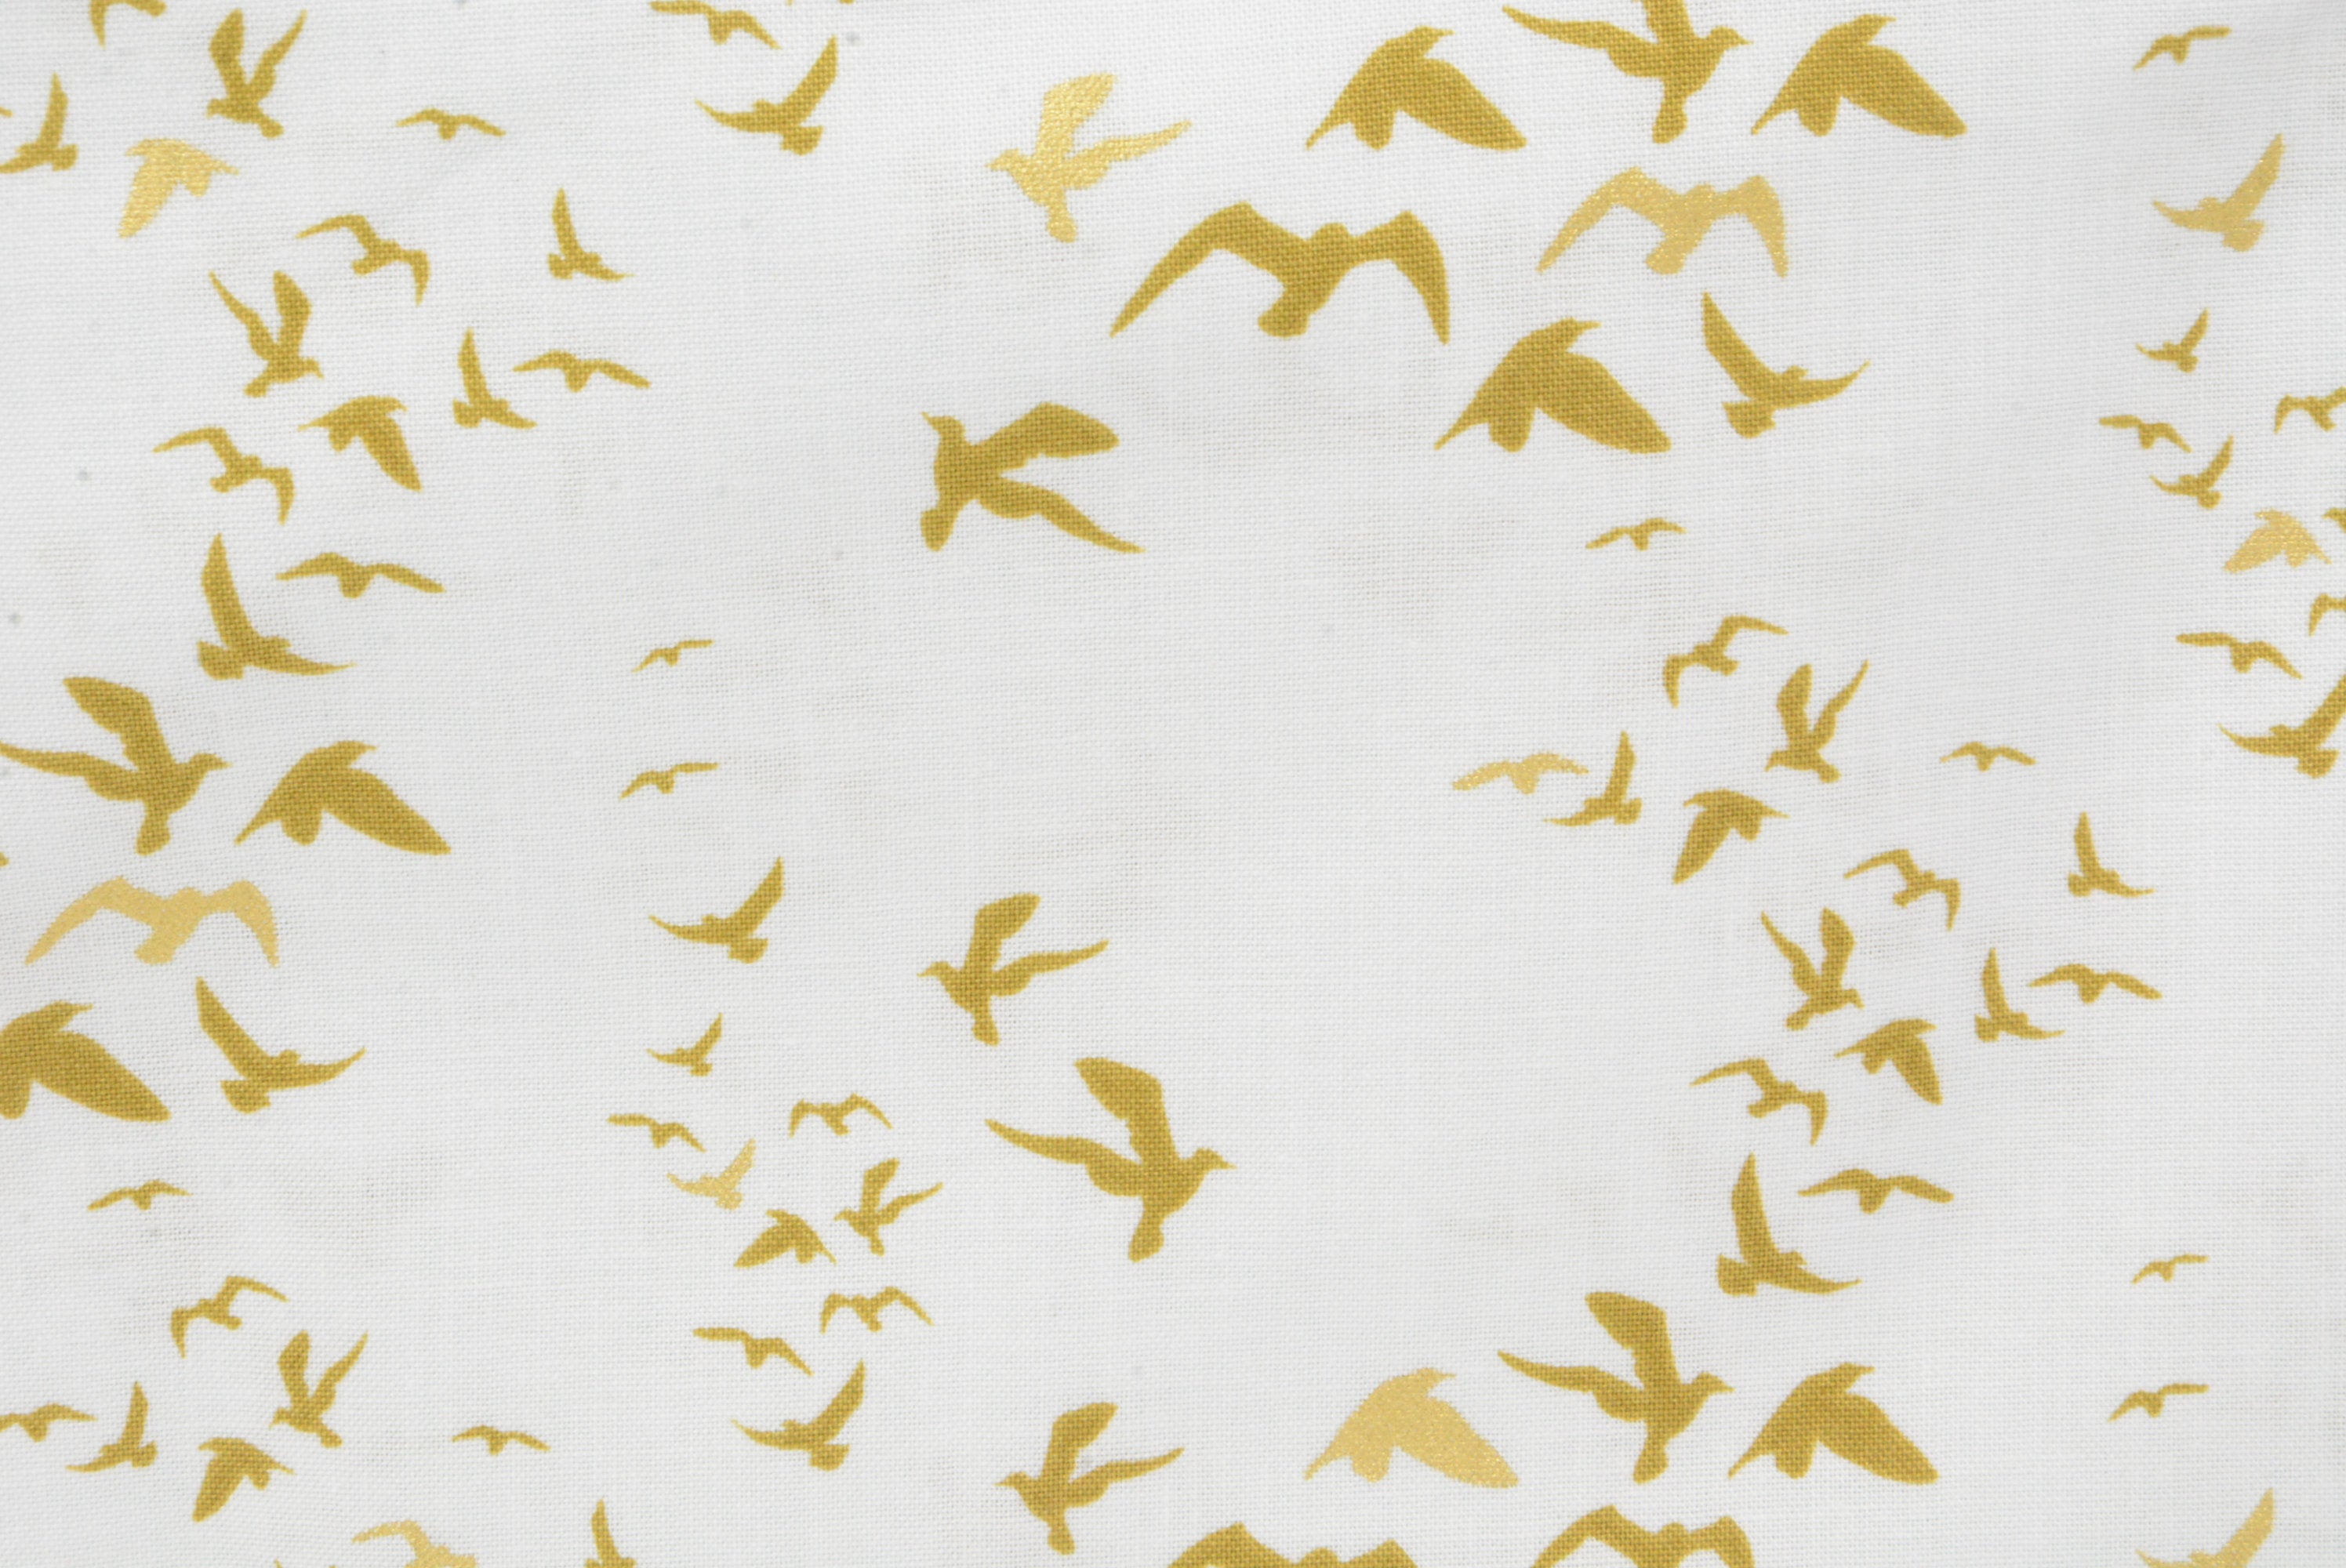 Sky of Doves with *Gold Metallic Print*